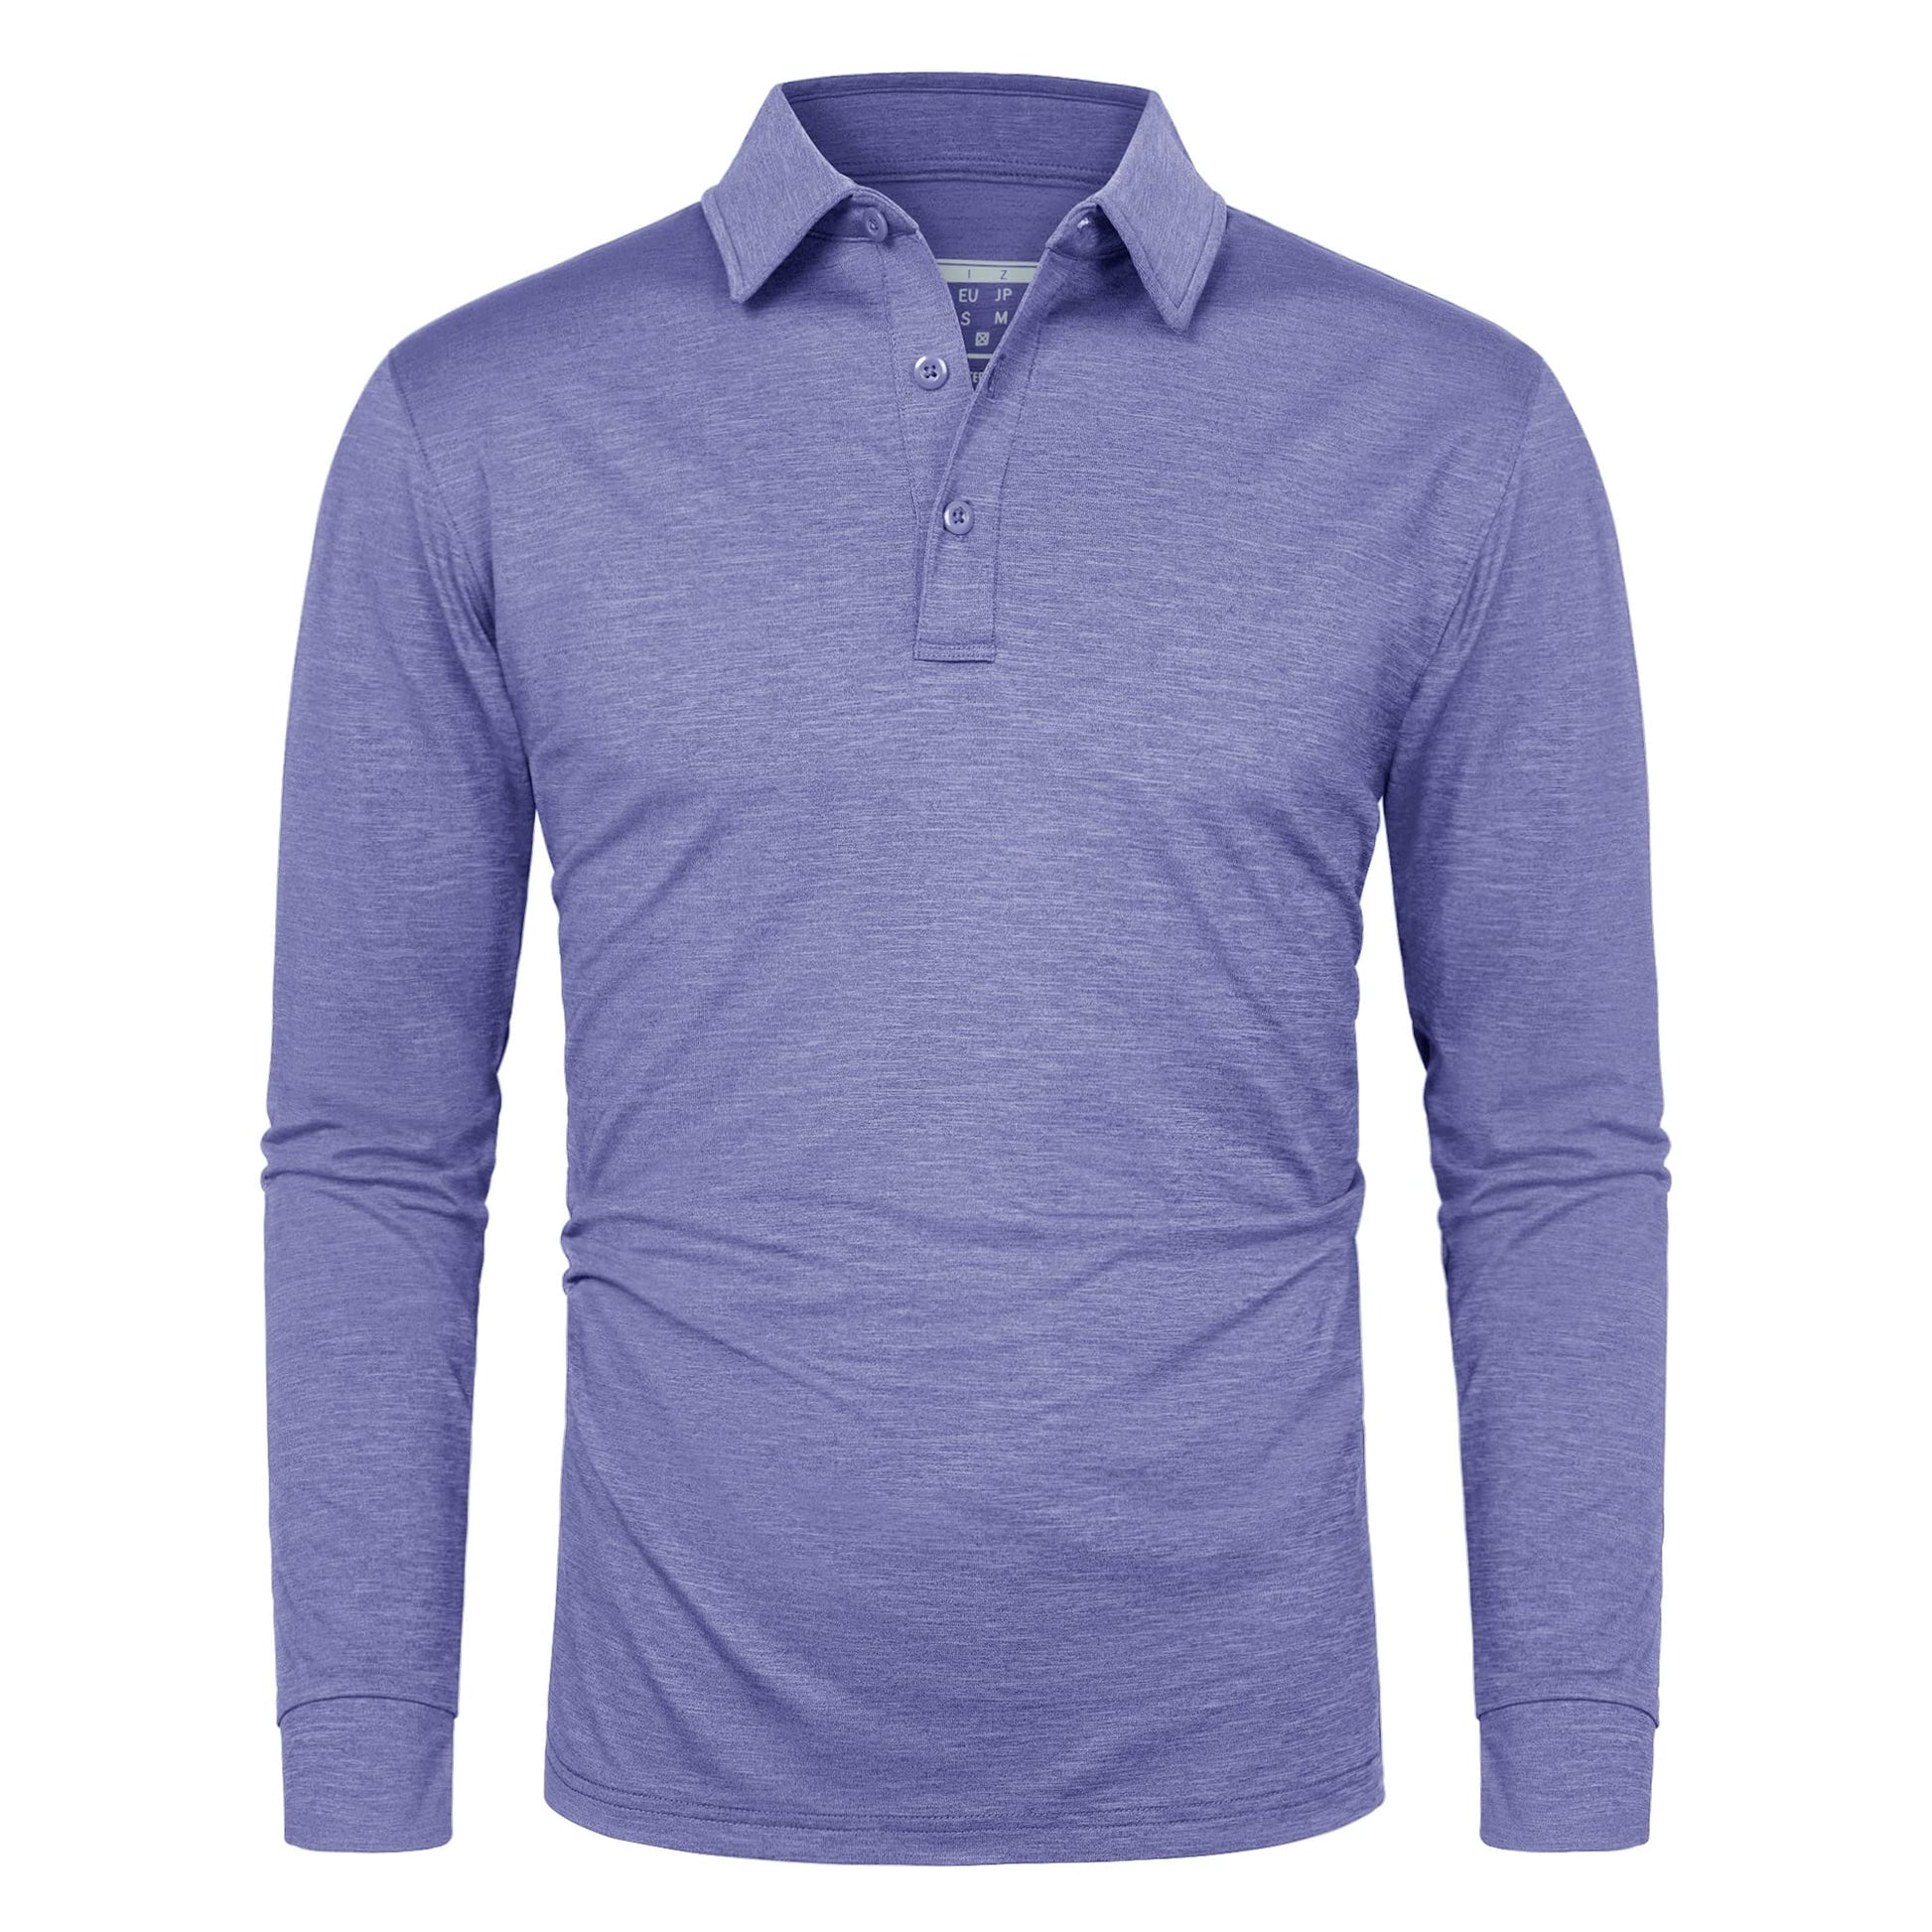 Soft Polyester Golf Polo Long Sleeve Shirt in purple